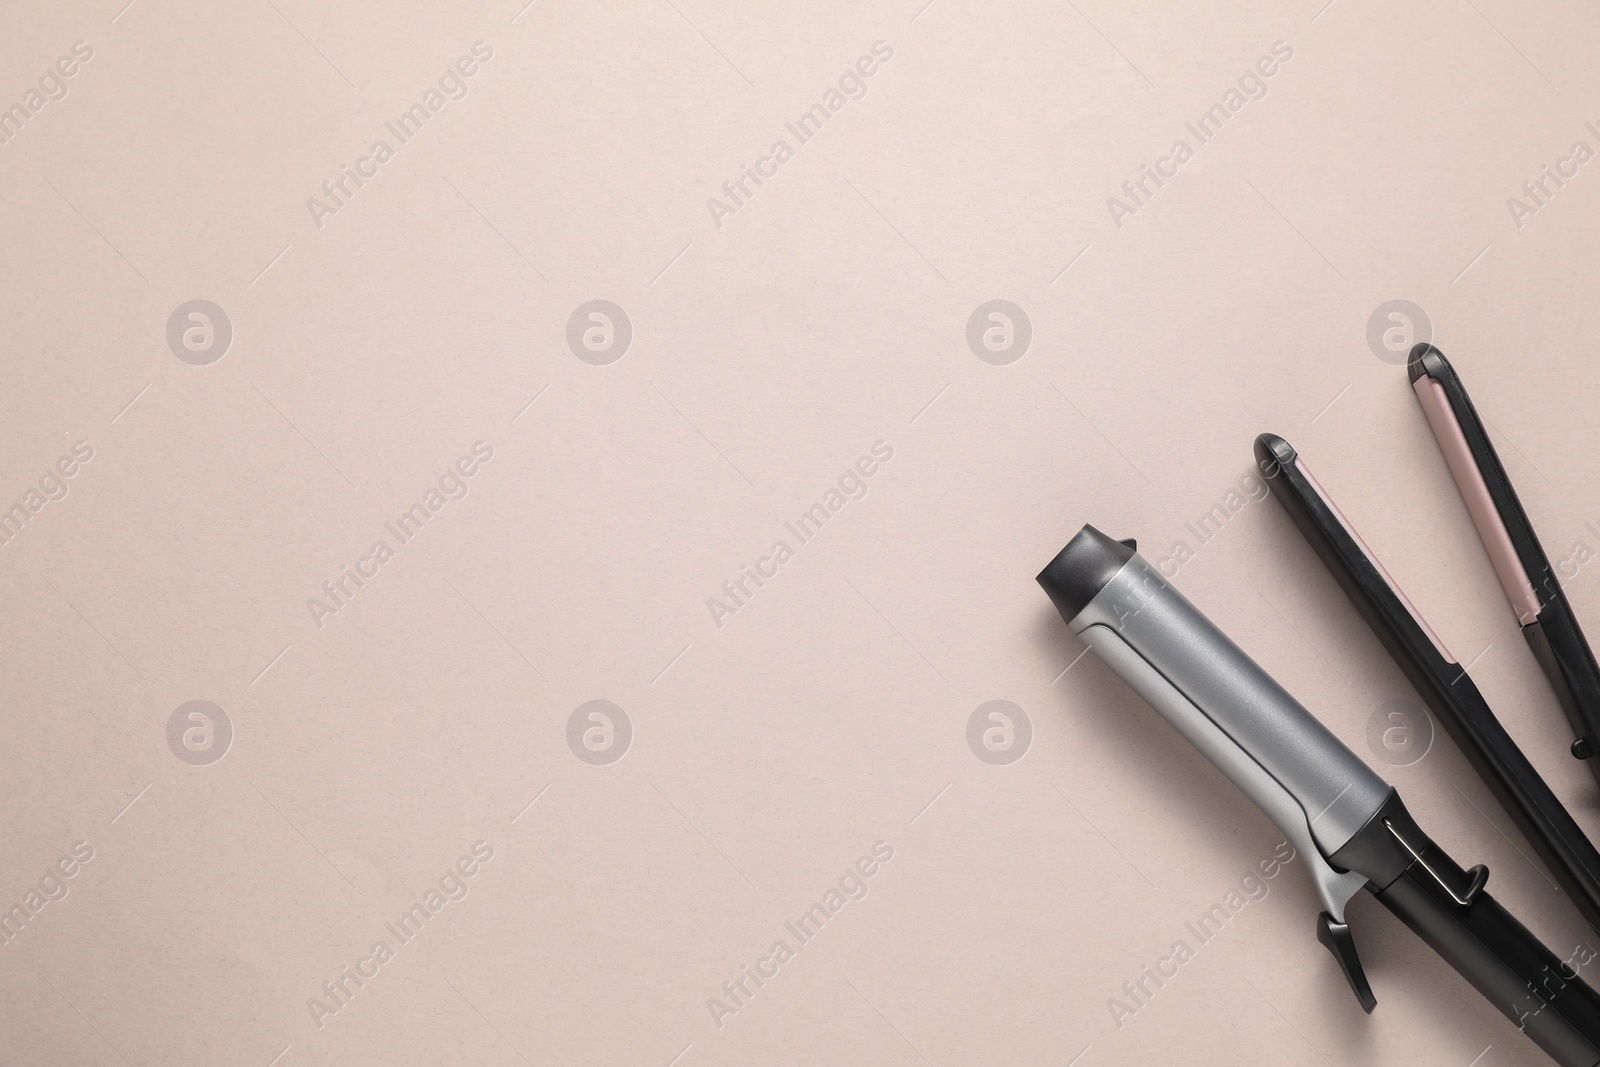 Photo of Curling iron and hair straightener on beige background, top view. Space for text